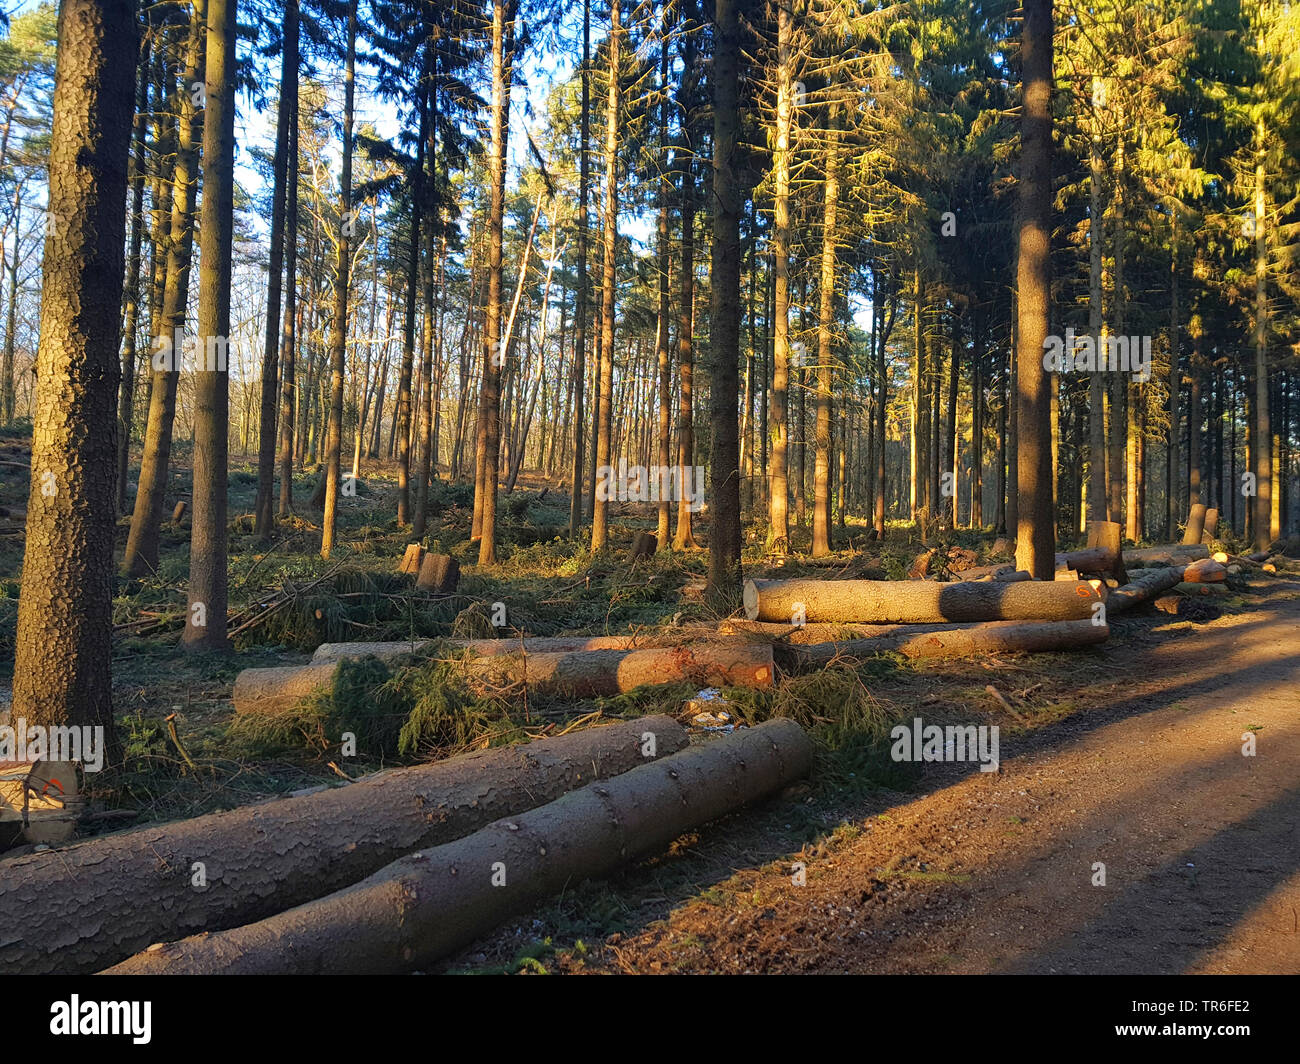 Norway spruce (Picea abies), felled spruce trees after a winter storm, Germany, North Rhine-Westphalia Stock Photo